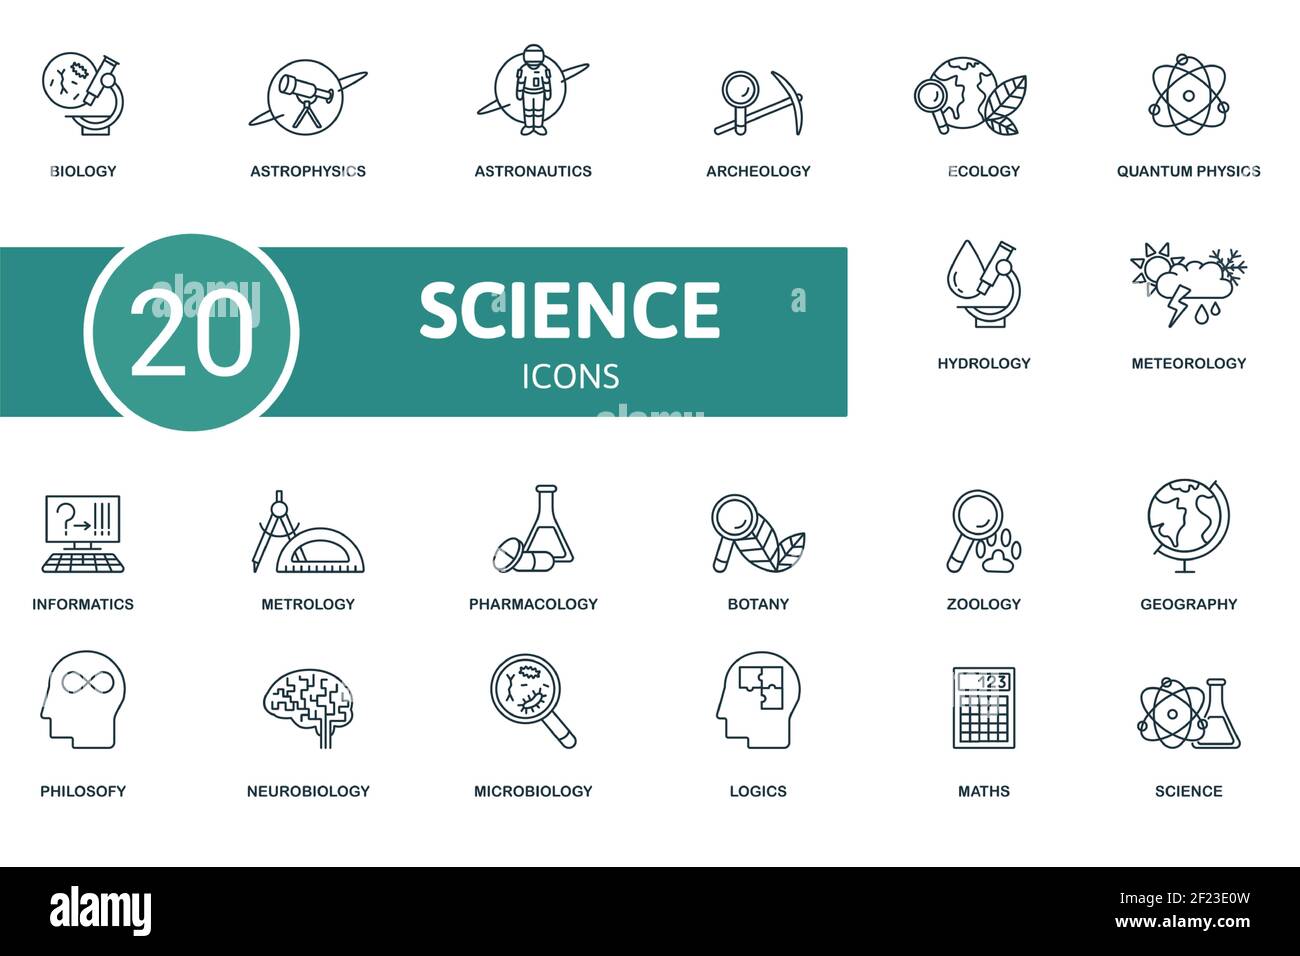 Science icon set. Contains editable icons science theme such as astrophysics, archeology, quantum physics and more. Stock Vector